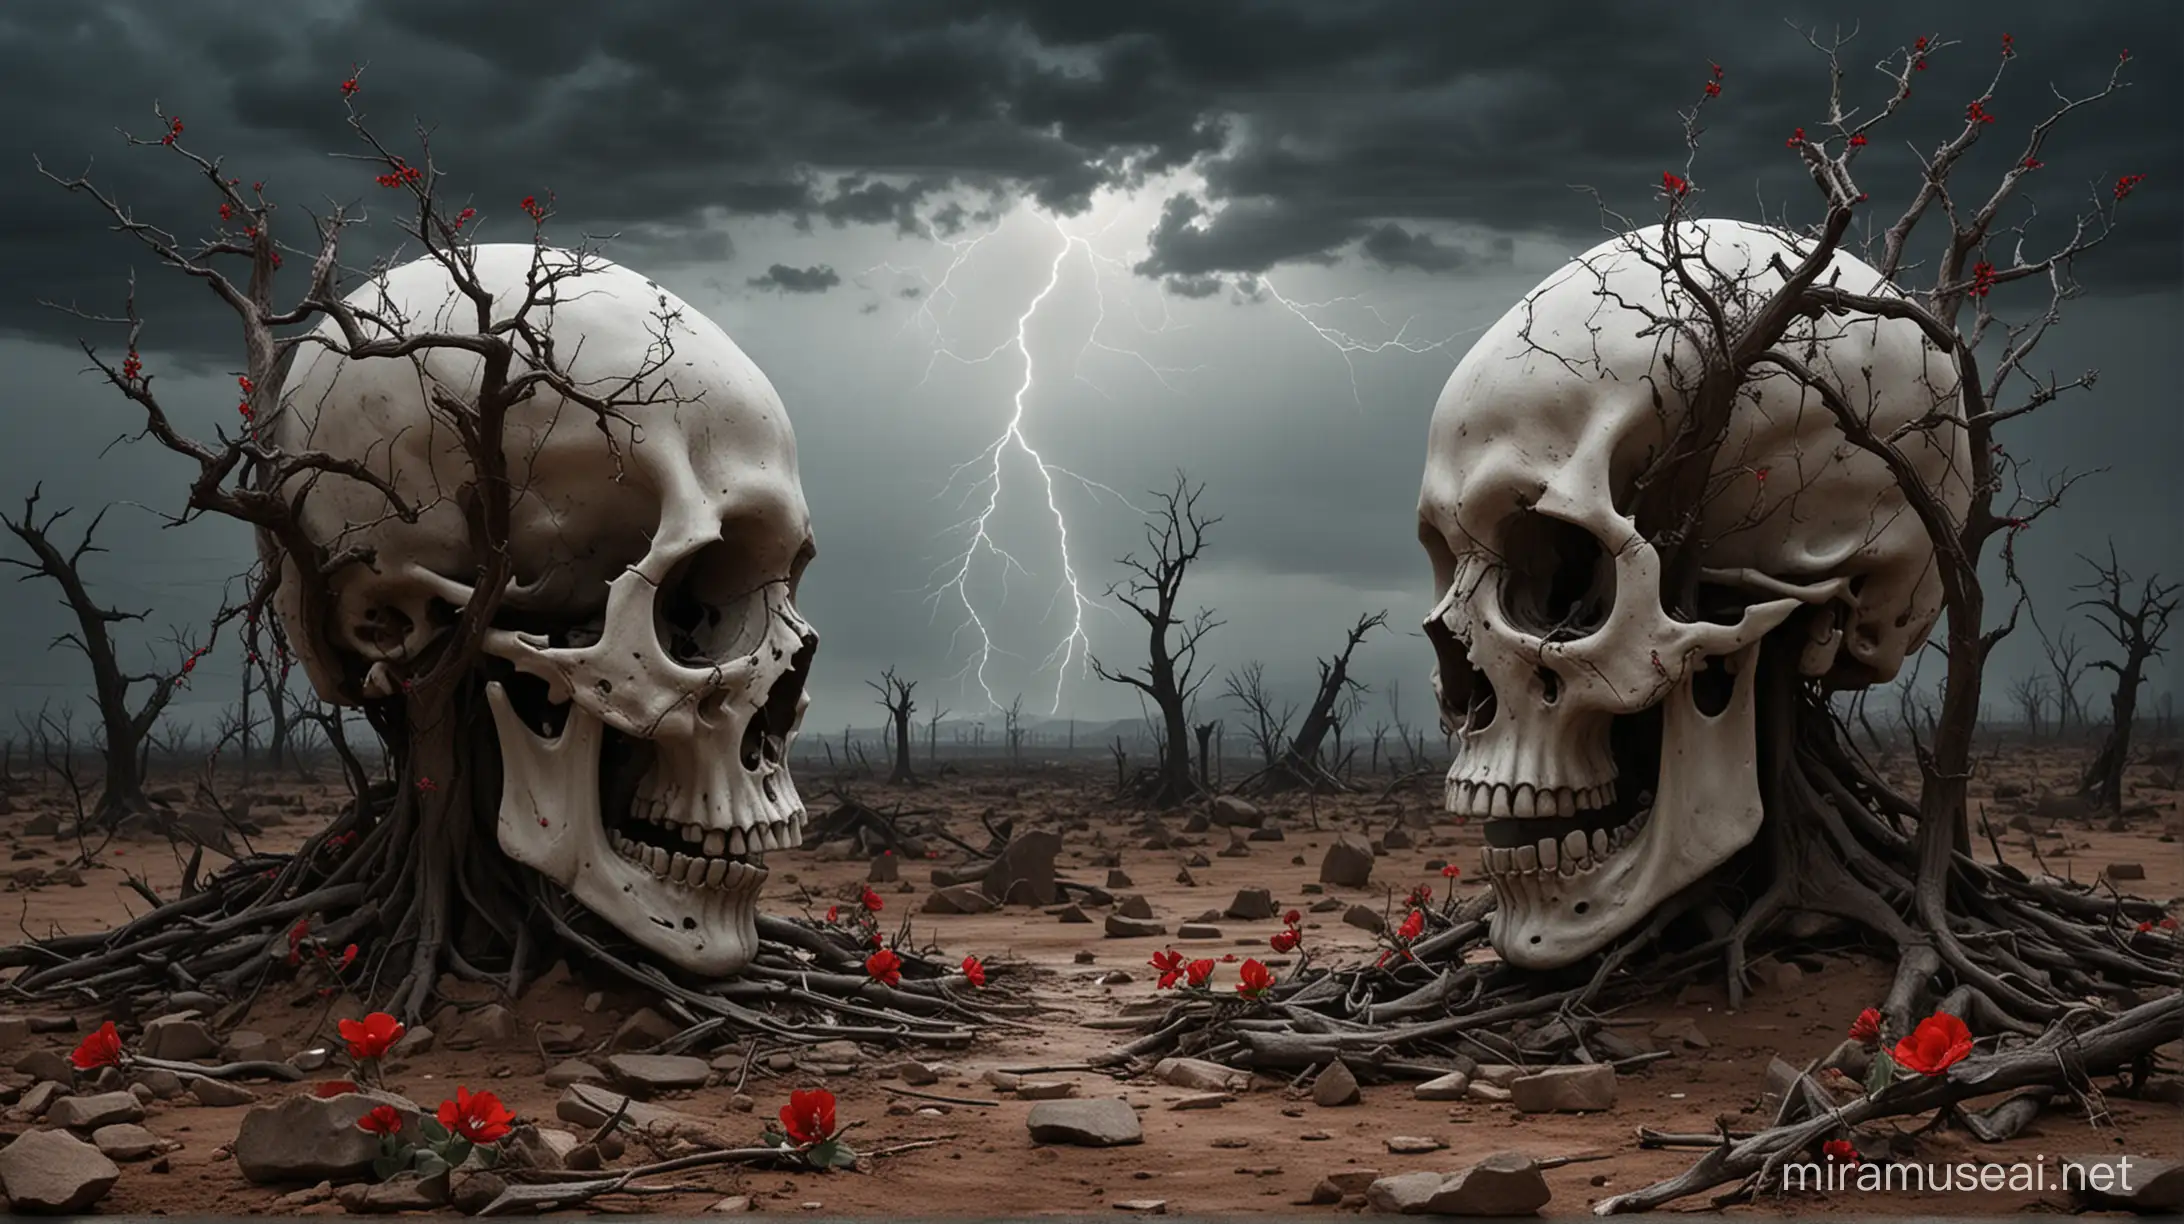 Two gaunt trees growing out of skulls lean against each other in a barren landscape. The hollows of the skulls form roaring faces that symbolize rage and battle.
The foliage of the trees growing out of the skulls are depicted as sharp blades, representing death and suffering.
The branches of the two trees surround a single, blood-red flower in the center, symbolizing hope and beauty in the midst of destruction.


A dark, stormy sky, saturated with lightning, reflects tension and destruction.
In the distance you can see the silhouette of the once proud city in ruins, a reminder of a bygone civilization.


Black and gray are the dominant colors to represent the sky and the barren landscape, symbolizing death and destruction.
Red accents on lightning bolts and flower, emphasizing struggle and hope.
Shades of white on the edges of the blades, emphasizing the cold reality of death. elpusztult világ